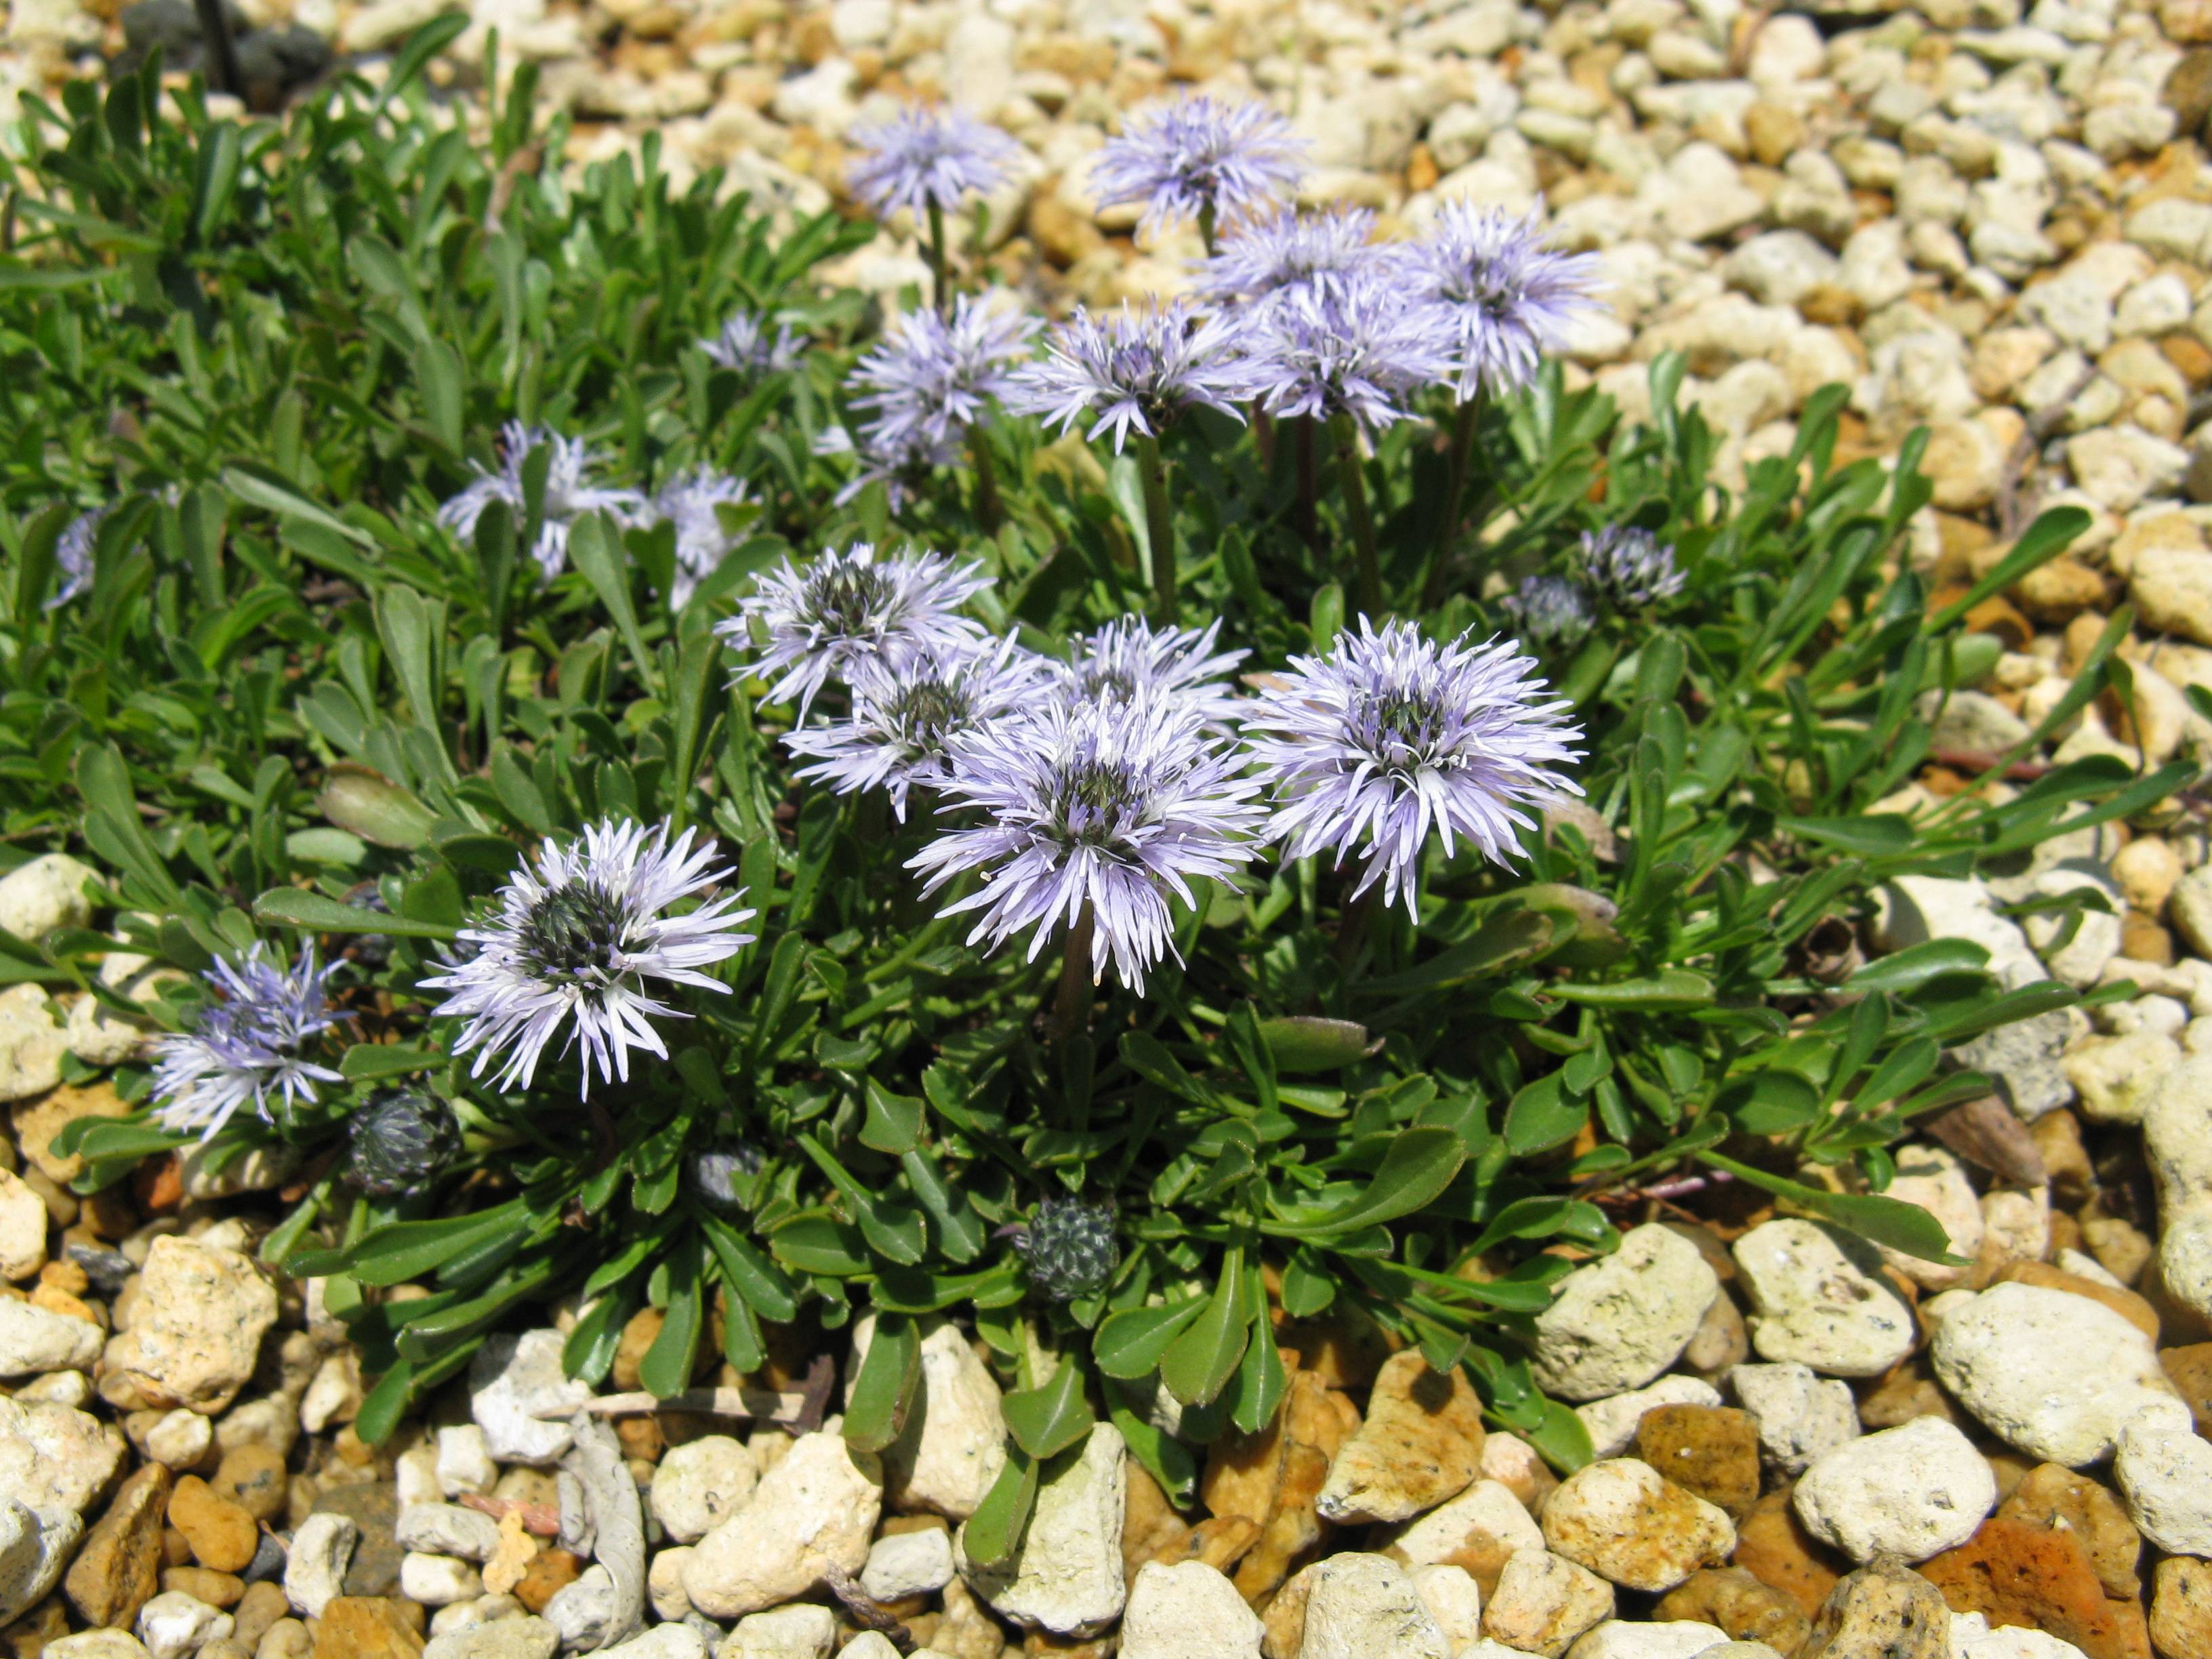 light-blue flowers with gray-blue center, green leaves and stems